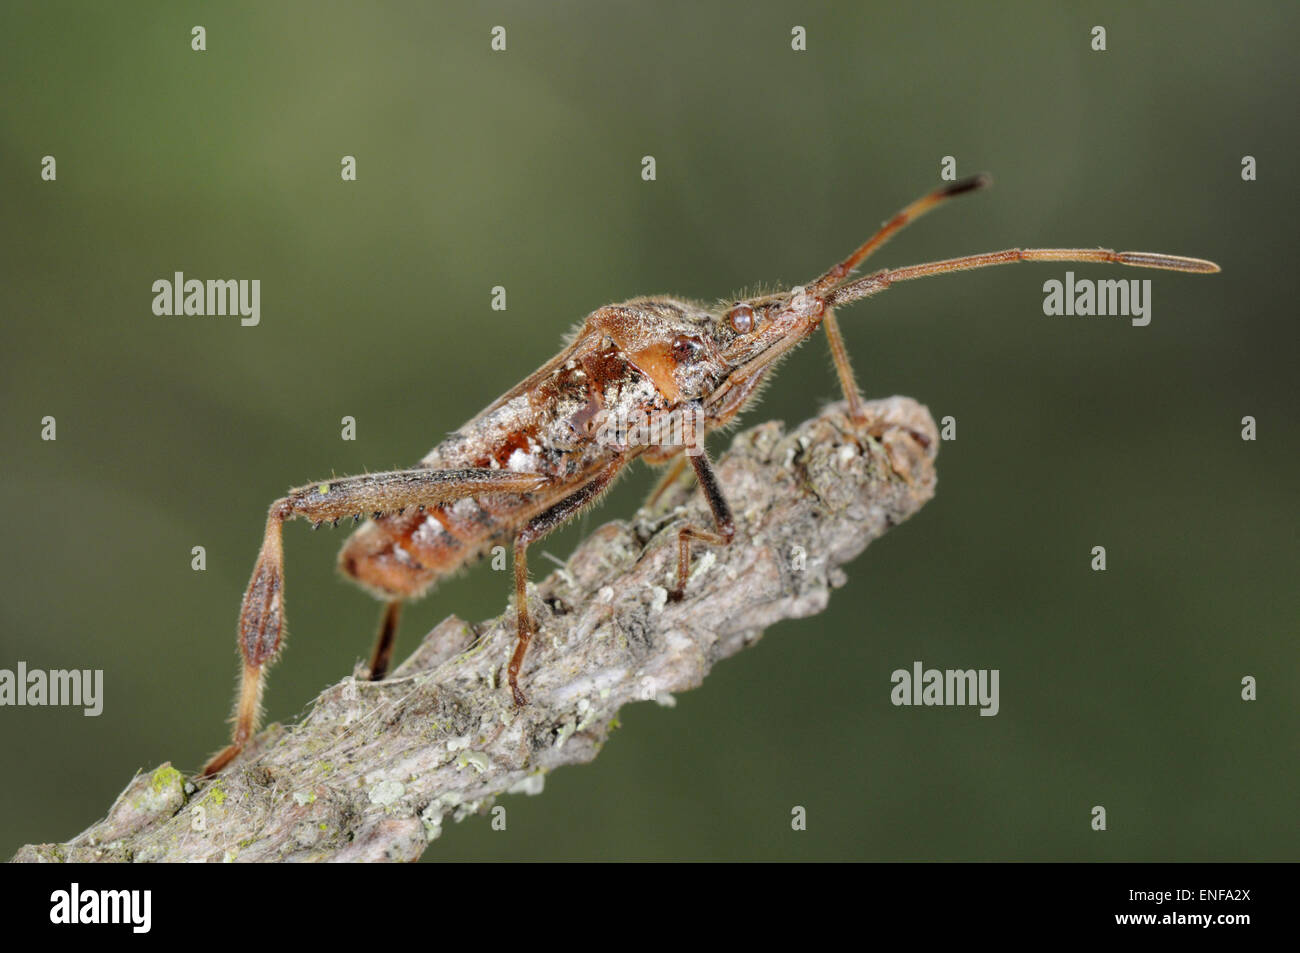 Western Conifer Seed Bug - Leptoglossus occidentalis Stock Photo